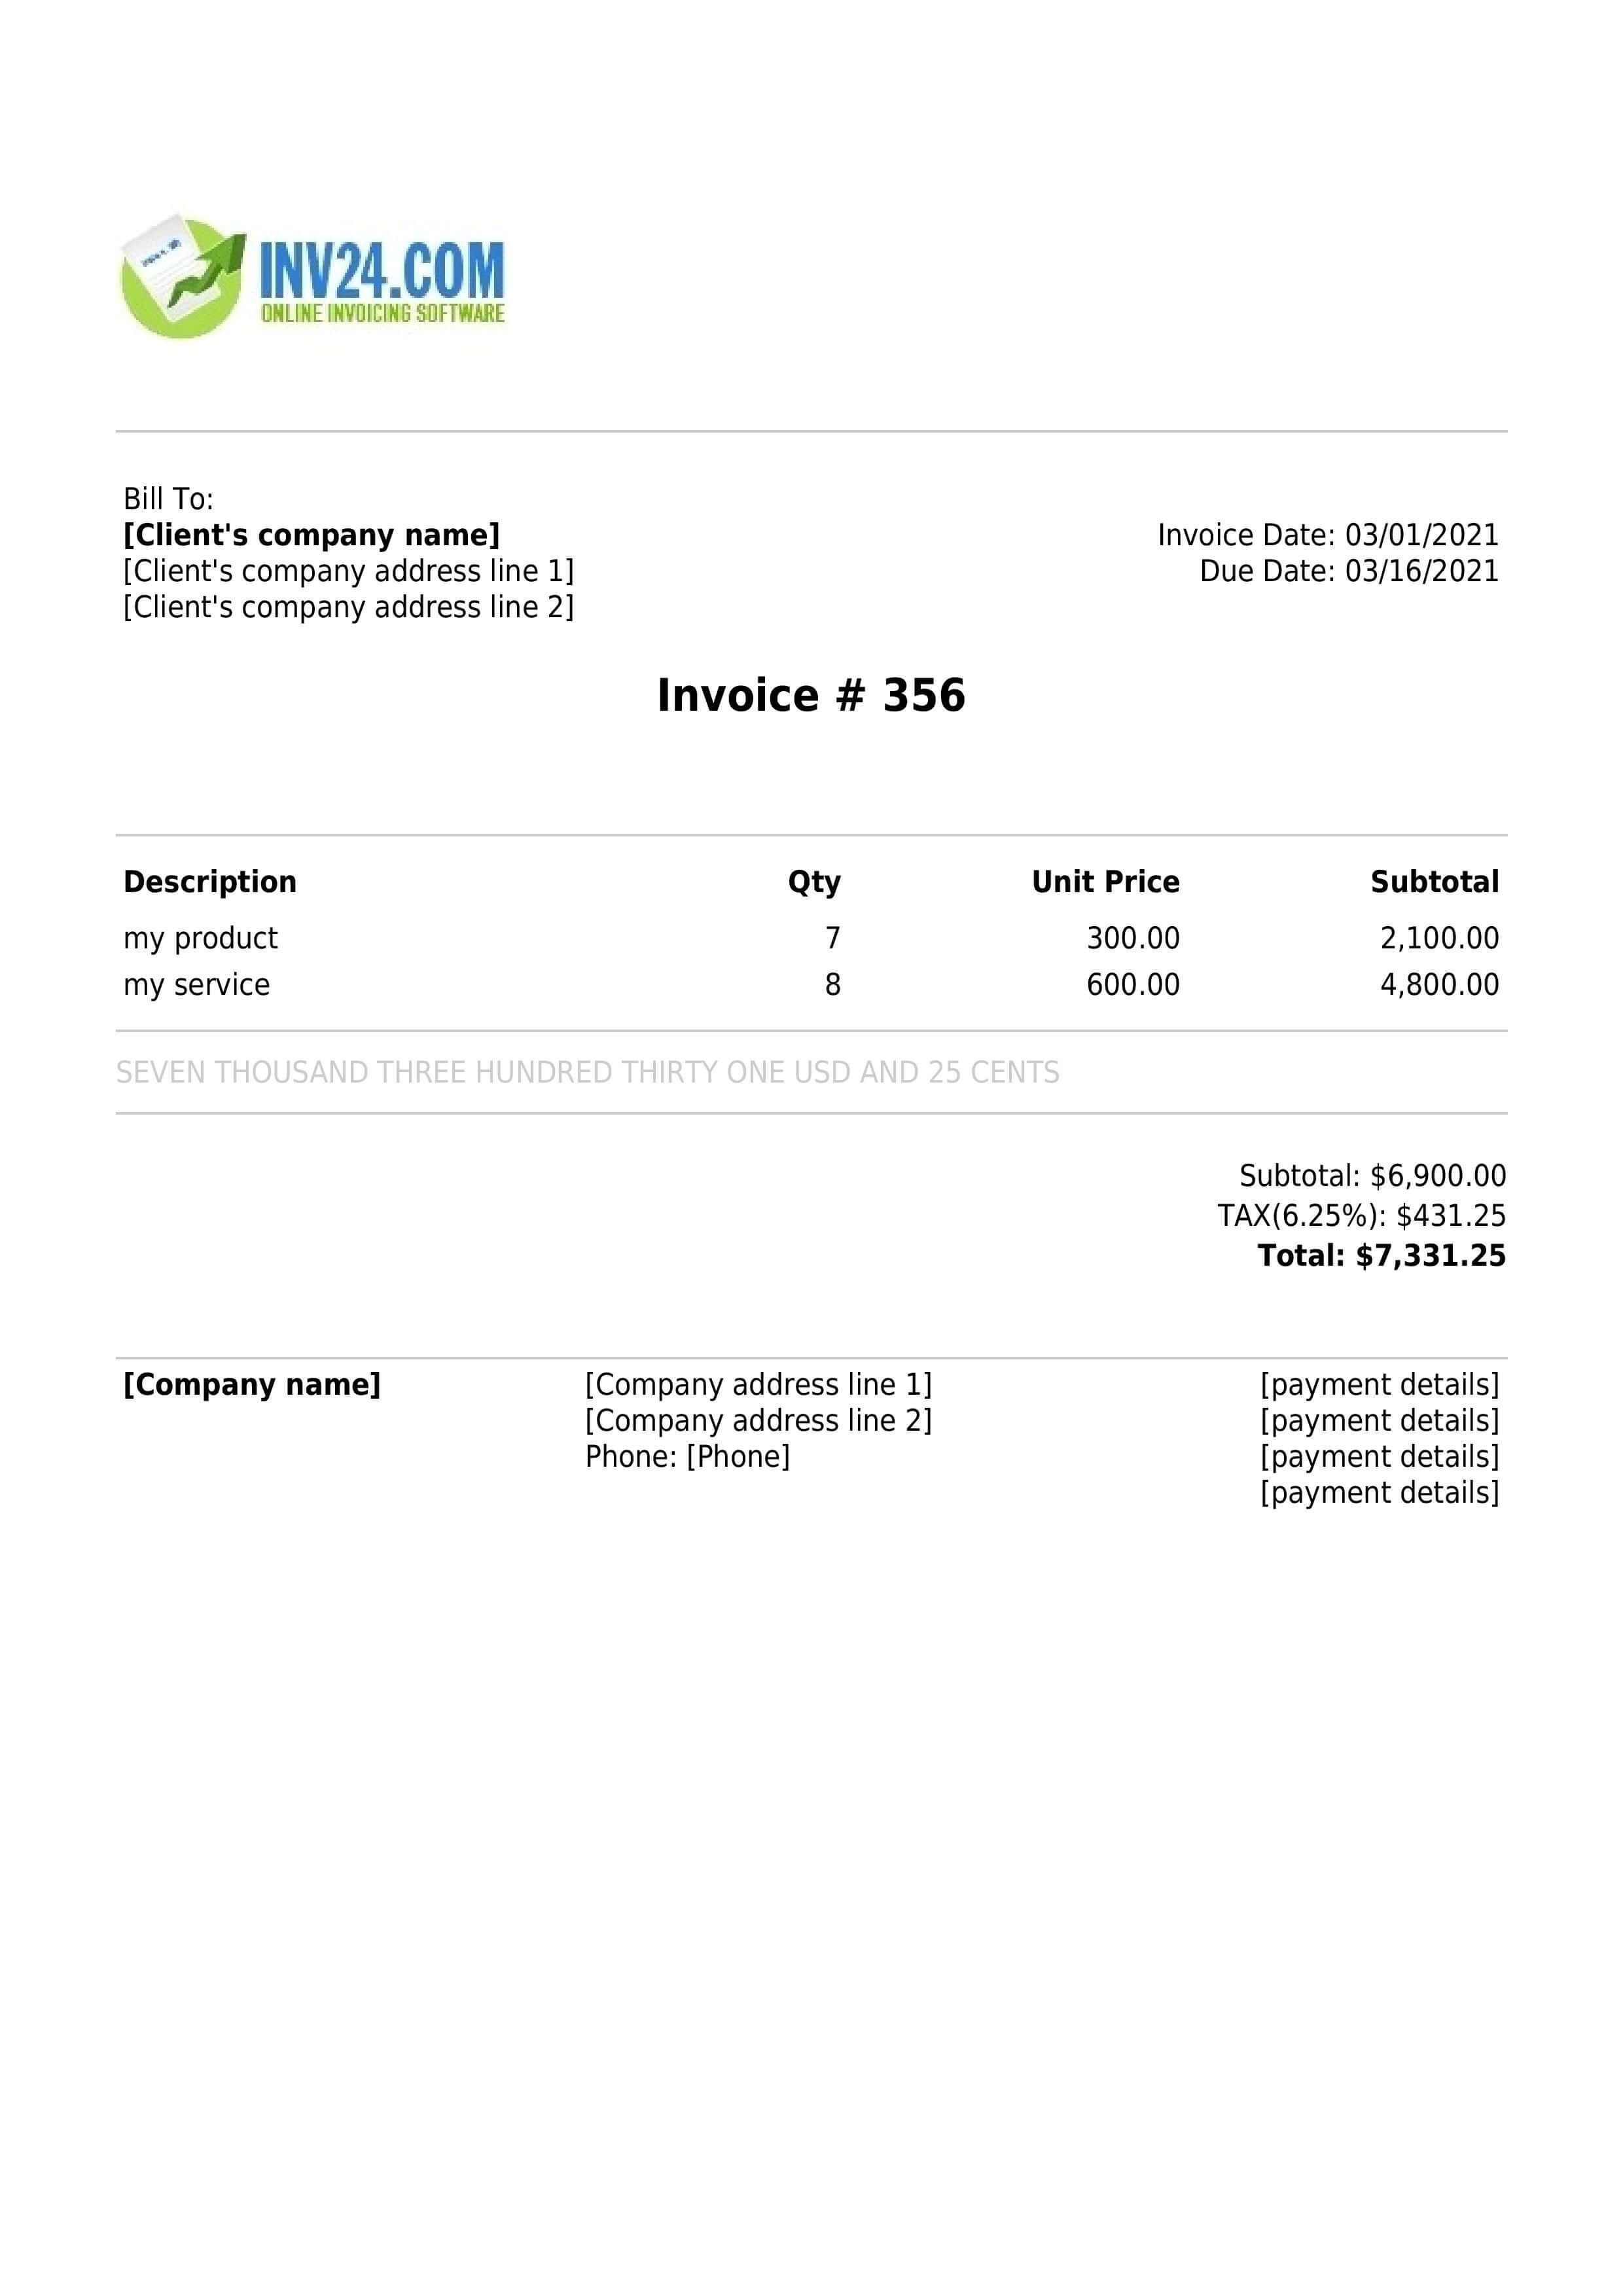 An invoice sample with mandatory and optional fields